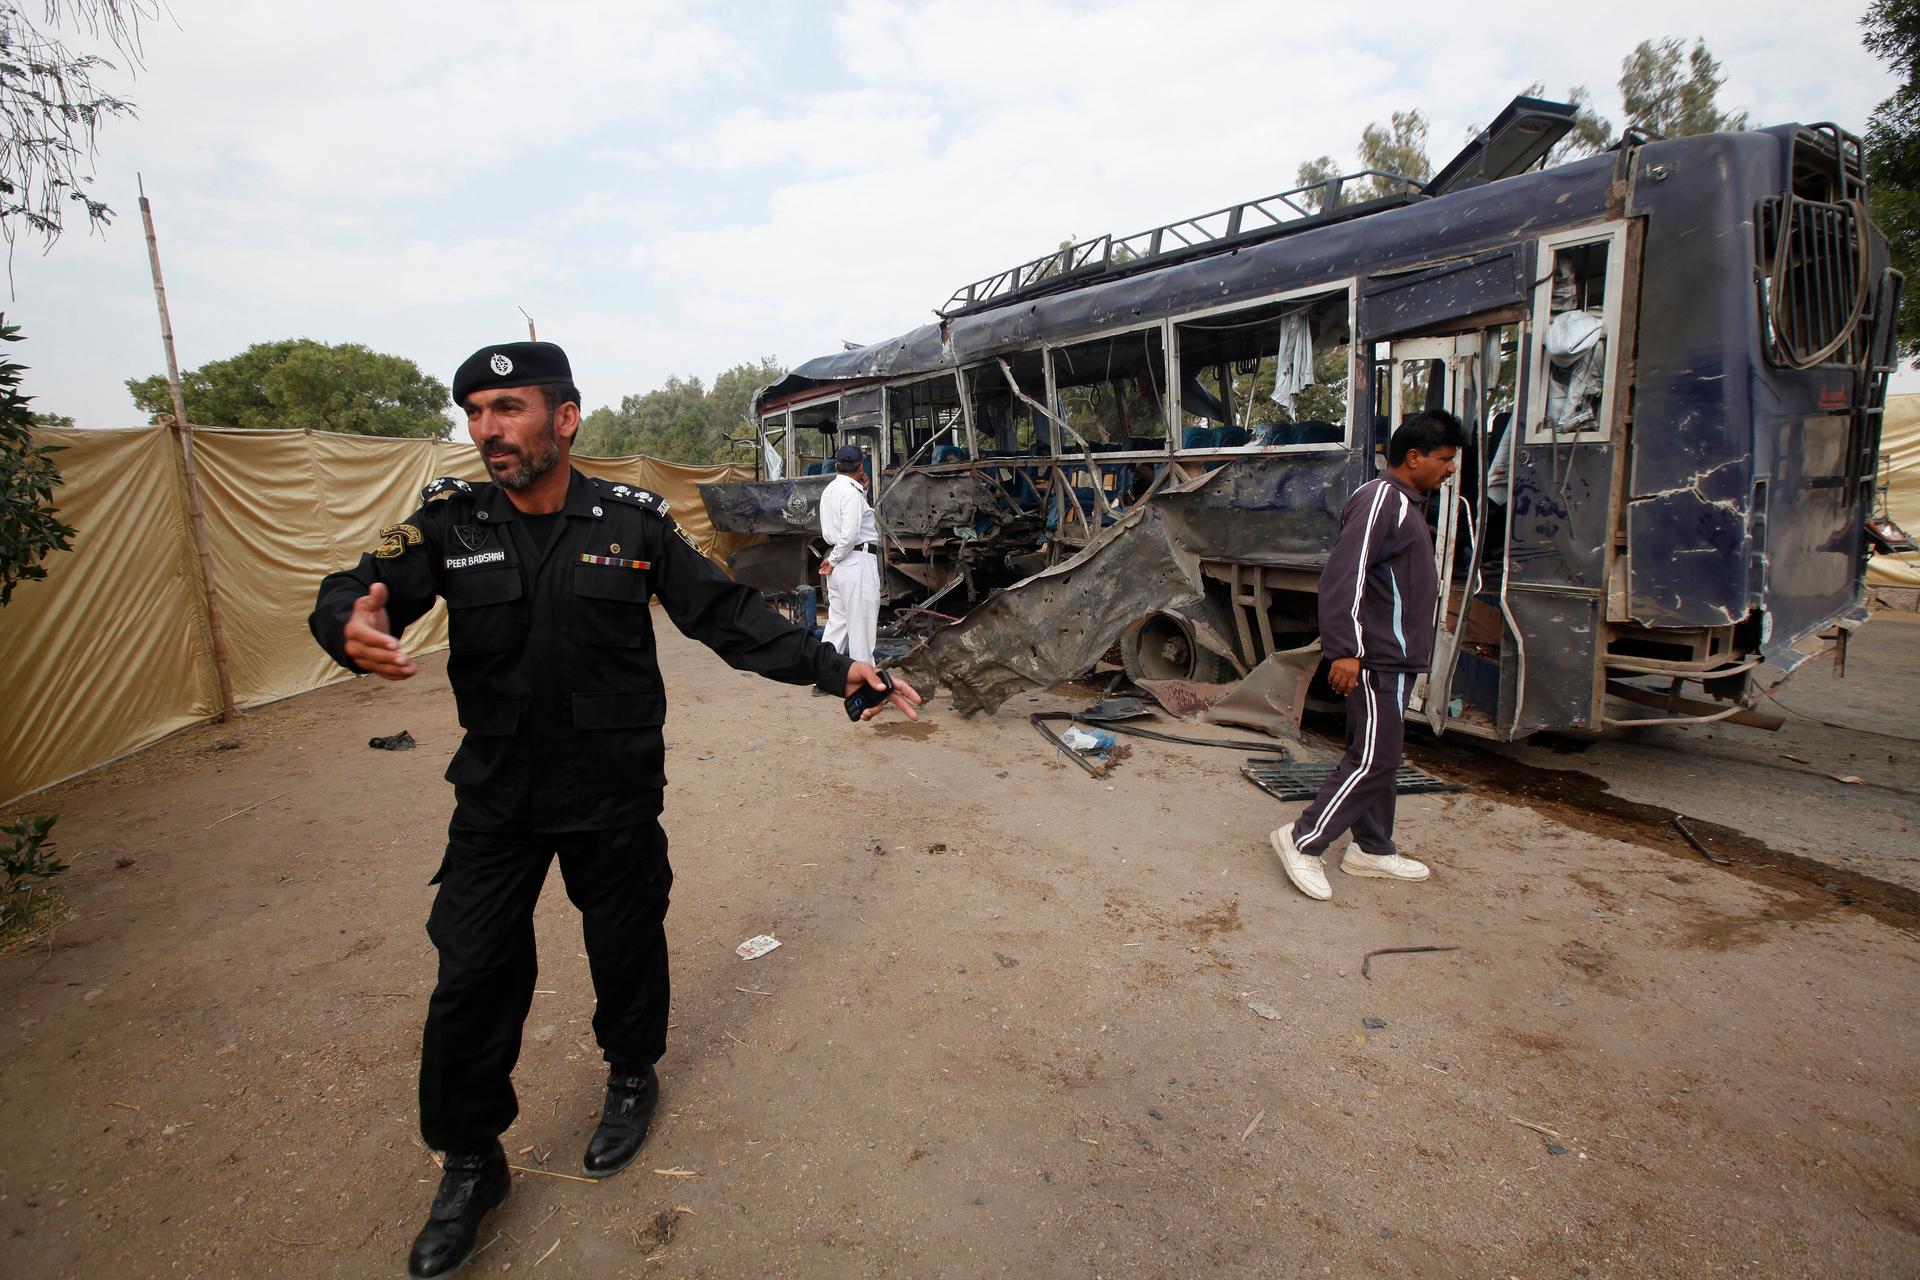 A security official prevents members of the media from approaching a damaged police bus at the site of an explosion in Karachi targeting policemen on February 13, 2014. 